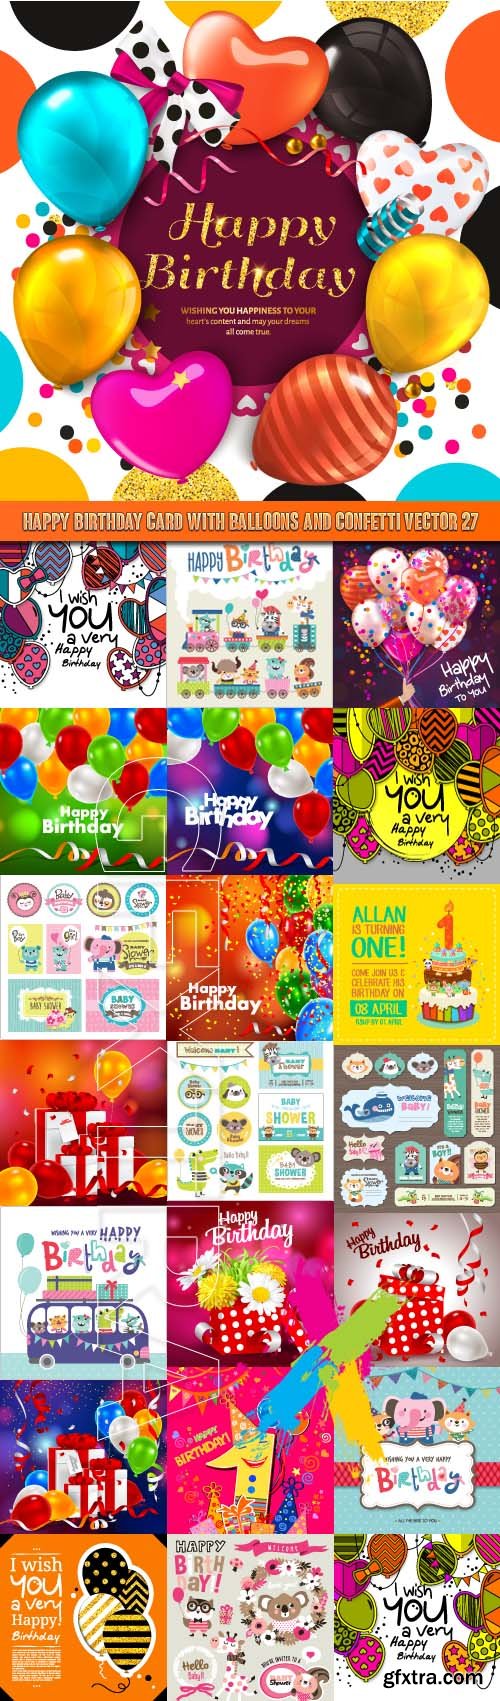 Happy Birthday card with balloons and confetti vector 27